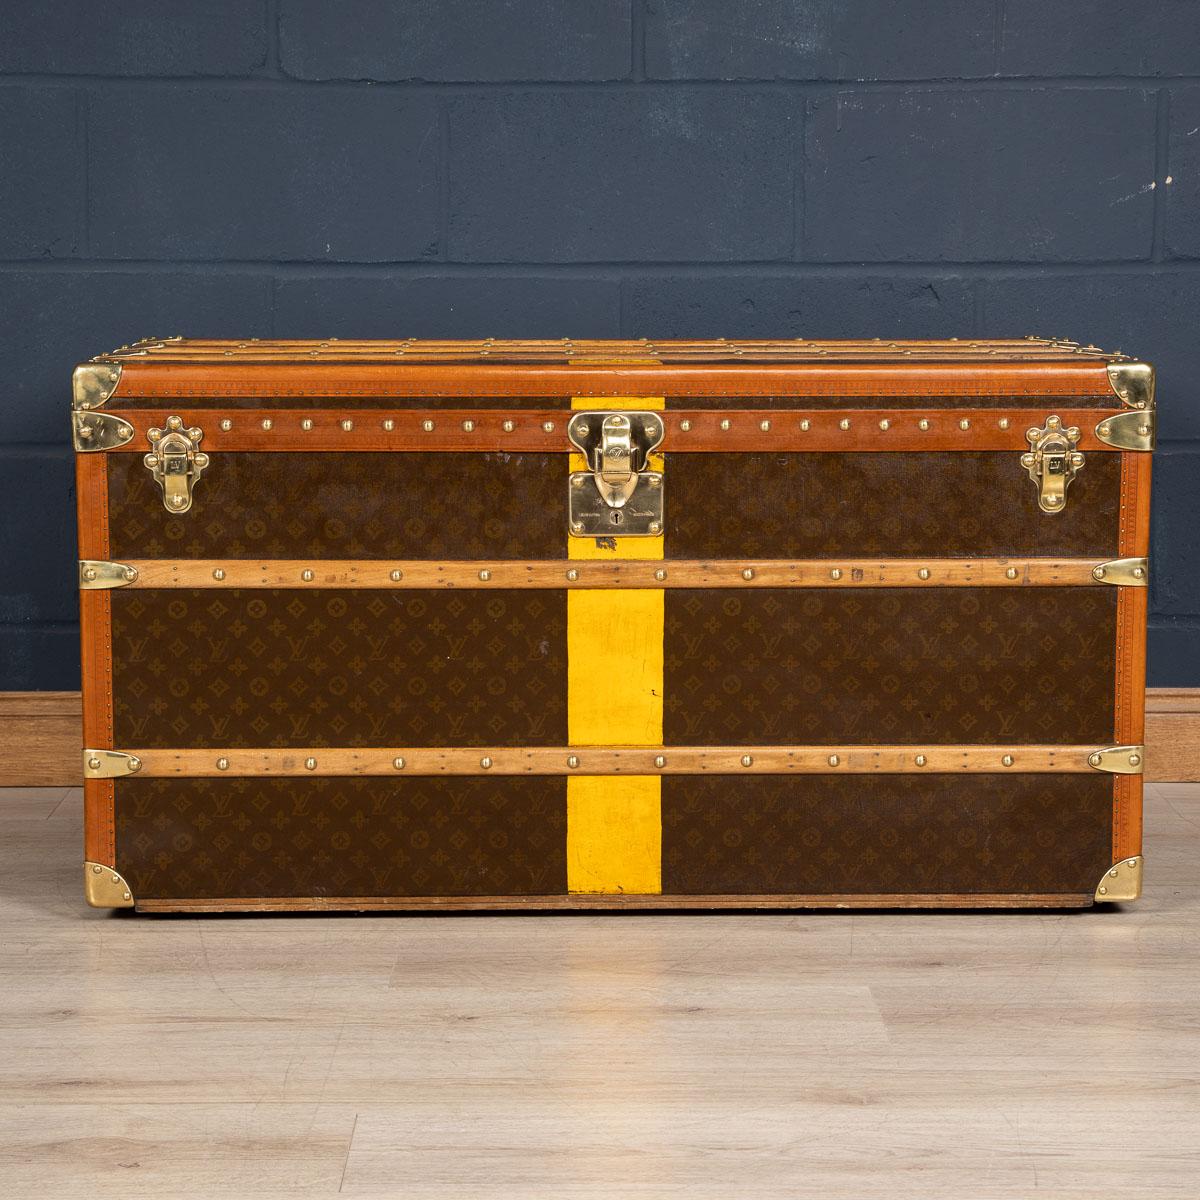 An early 20th century Louis Vuitton trunk. Covered in the world famous LV monogrammed canvas, with its lozine borders and brass fitting it would have been the top of the line even at the time of purchase some 100 years ago. Oozing style and elegance